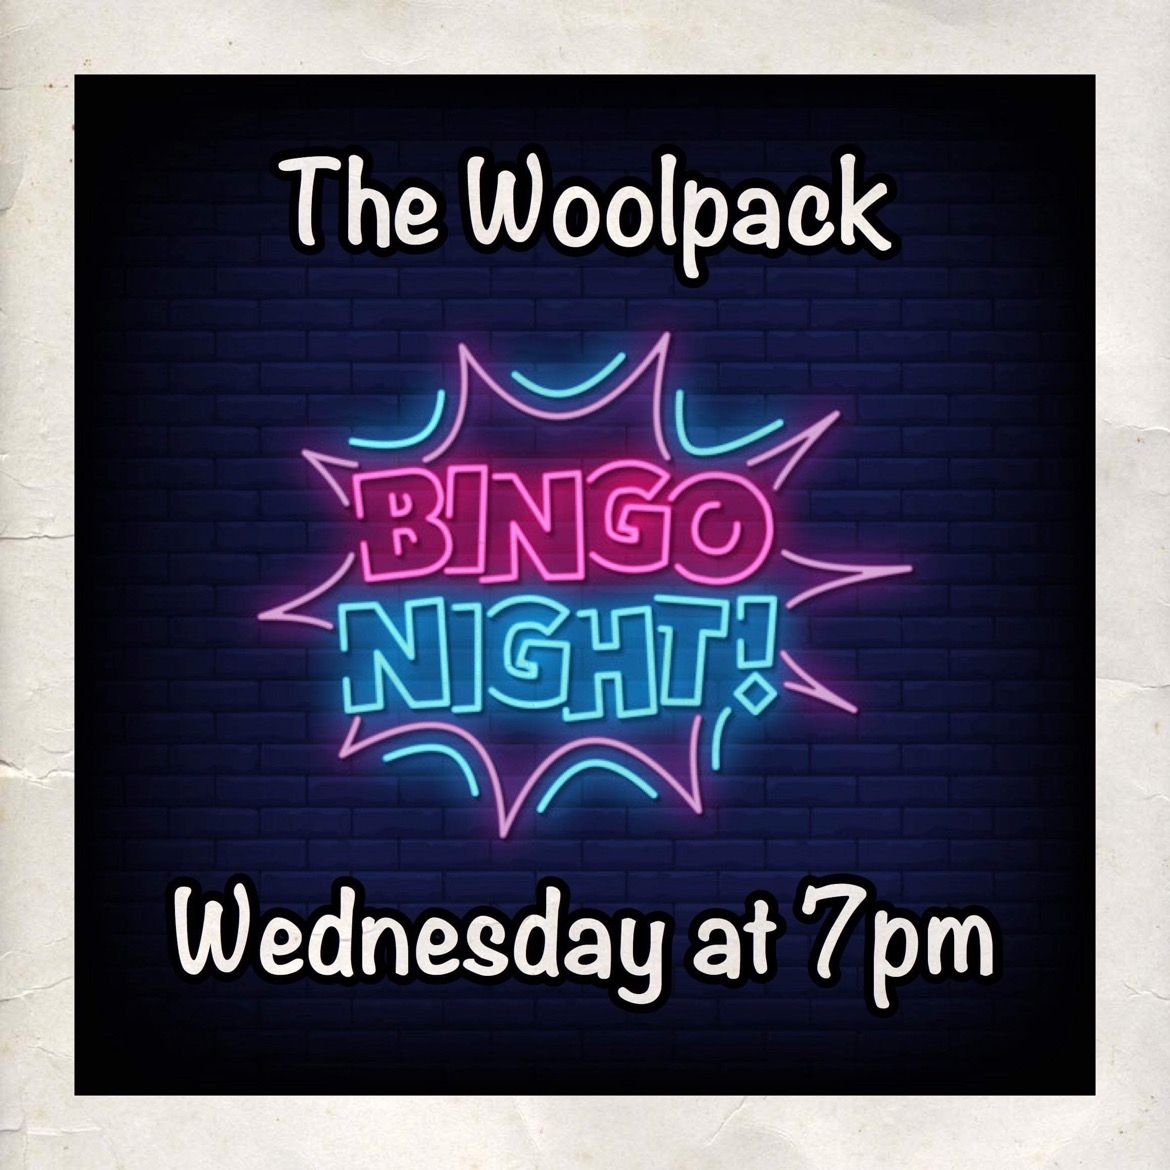 #Bingo is back at #TheWoolpack in #Beckington, #Frome! 7pm start for games of #TopTunes#Bingo and classic bingo with cash and snacks to be won